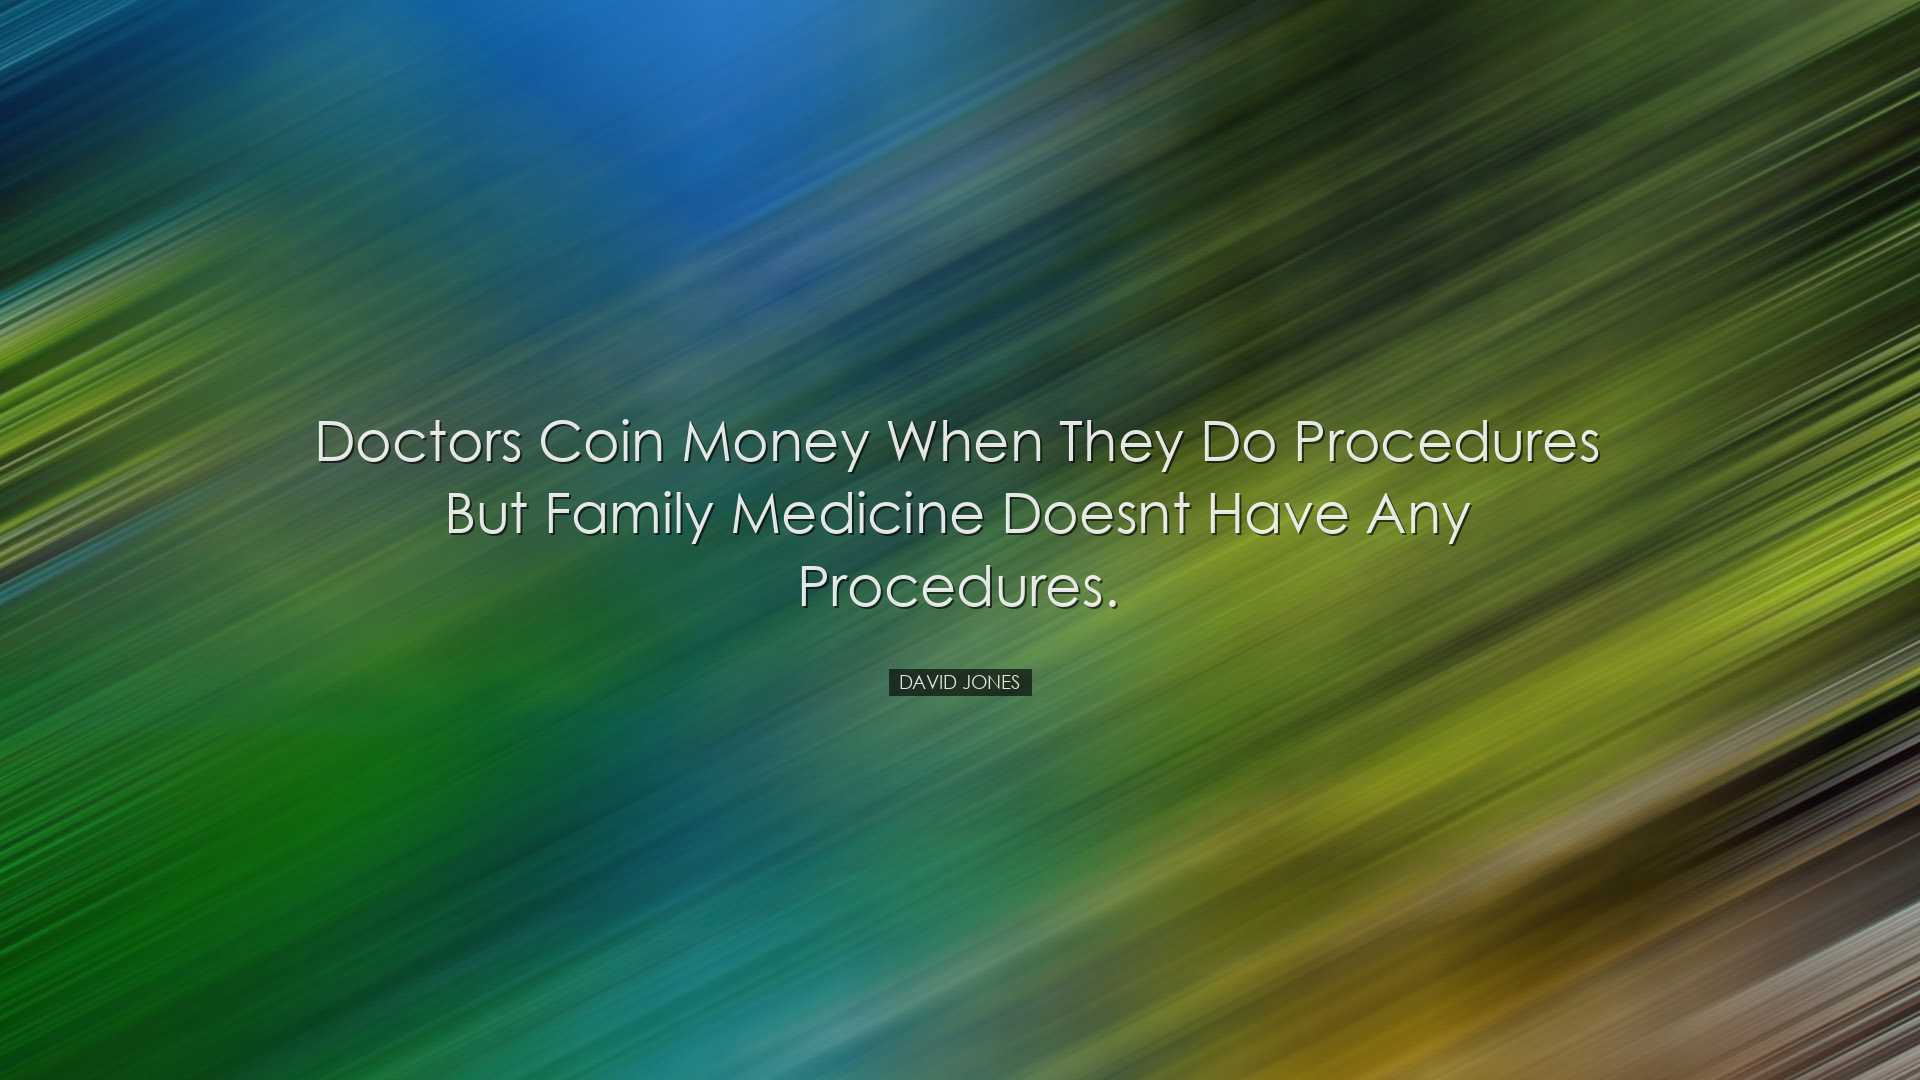 Doctors coin money when they do procedures but family medicine doe